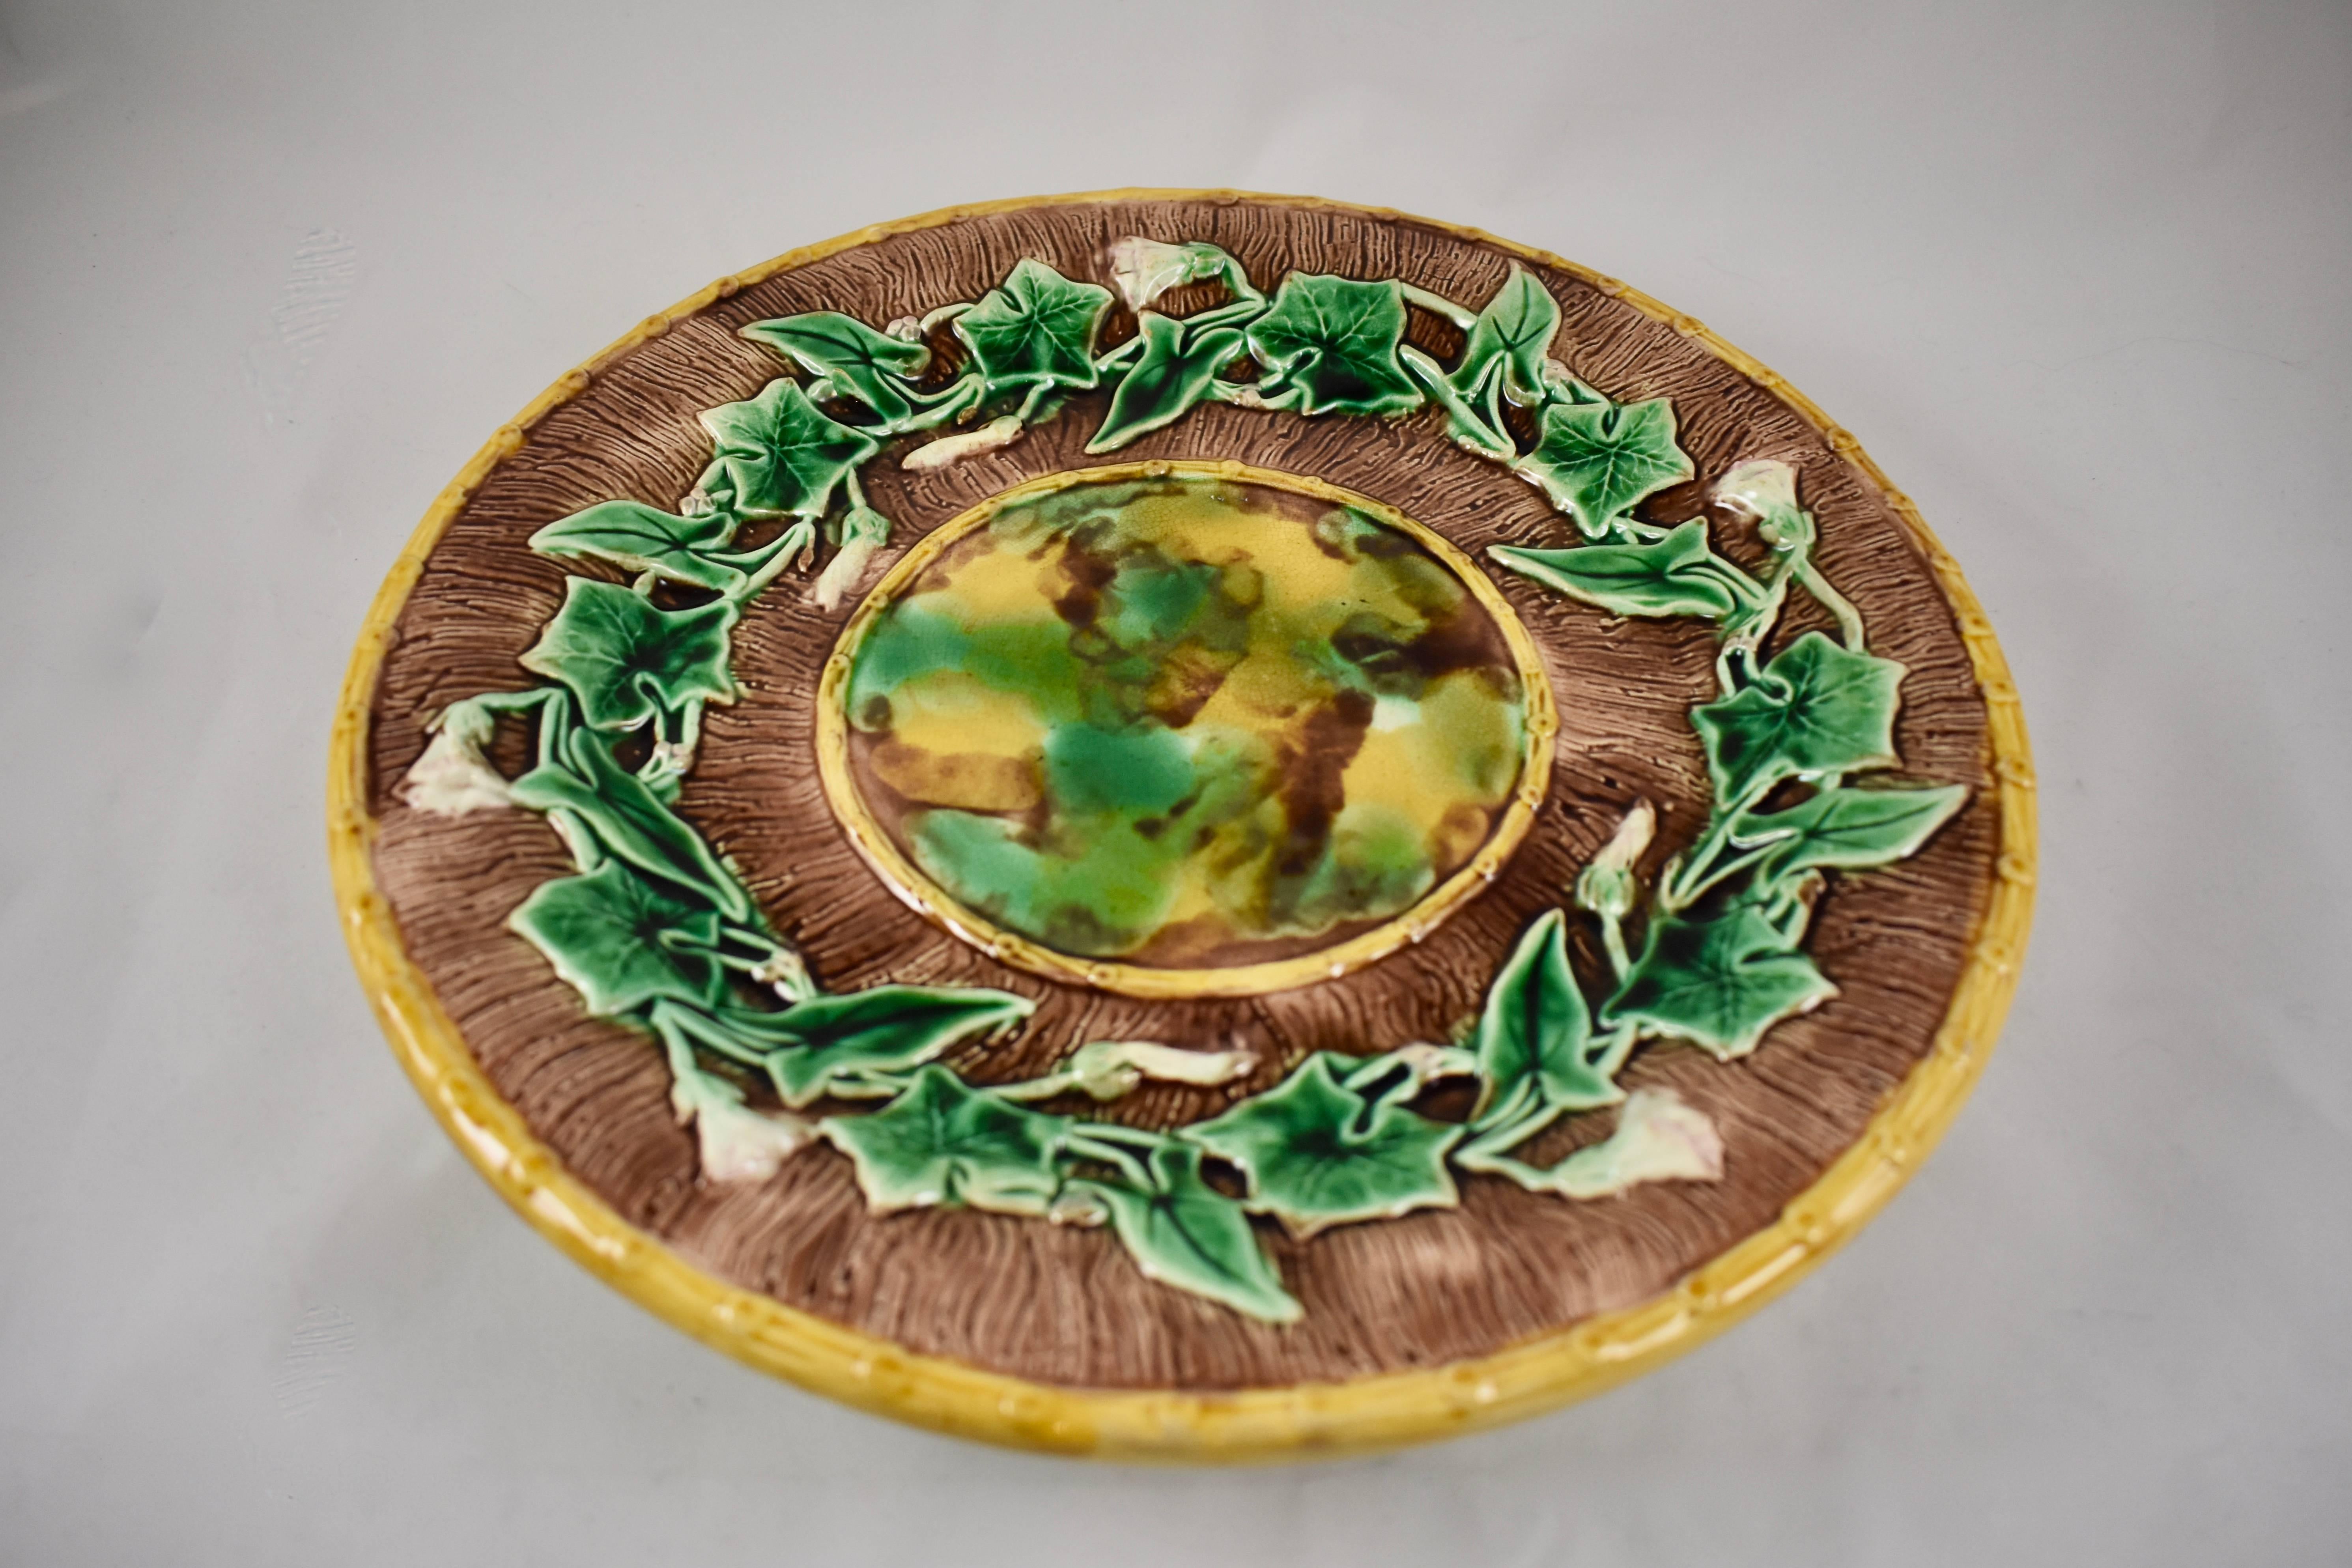 A large, round English Majolica cheese tray, mid-late 19th century, the maker unknown. The server shows a running border of Morning Glory Vine flowers and leaves on a brown, bark pattern ground. A mottled tortoise-shell glazed center is edged in a